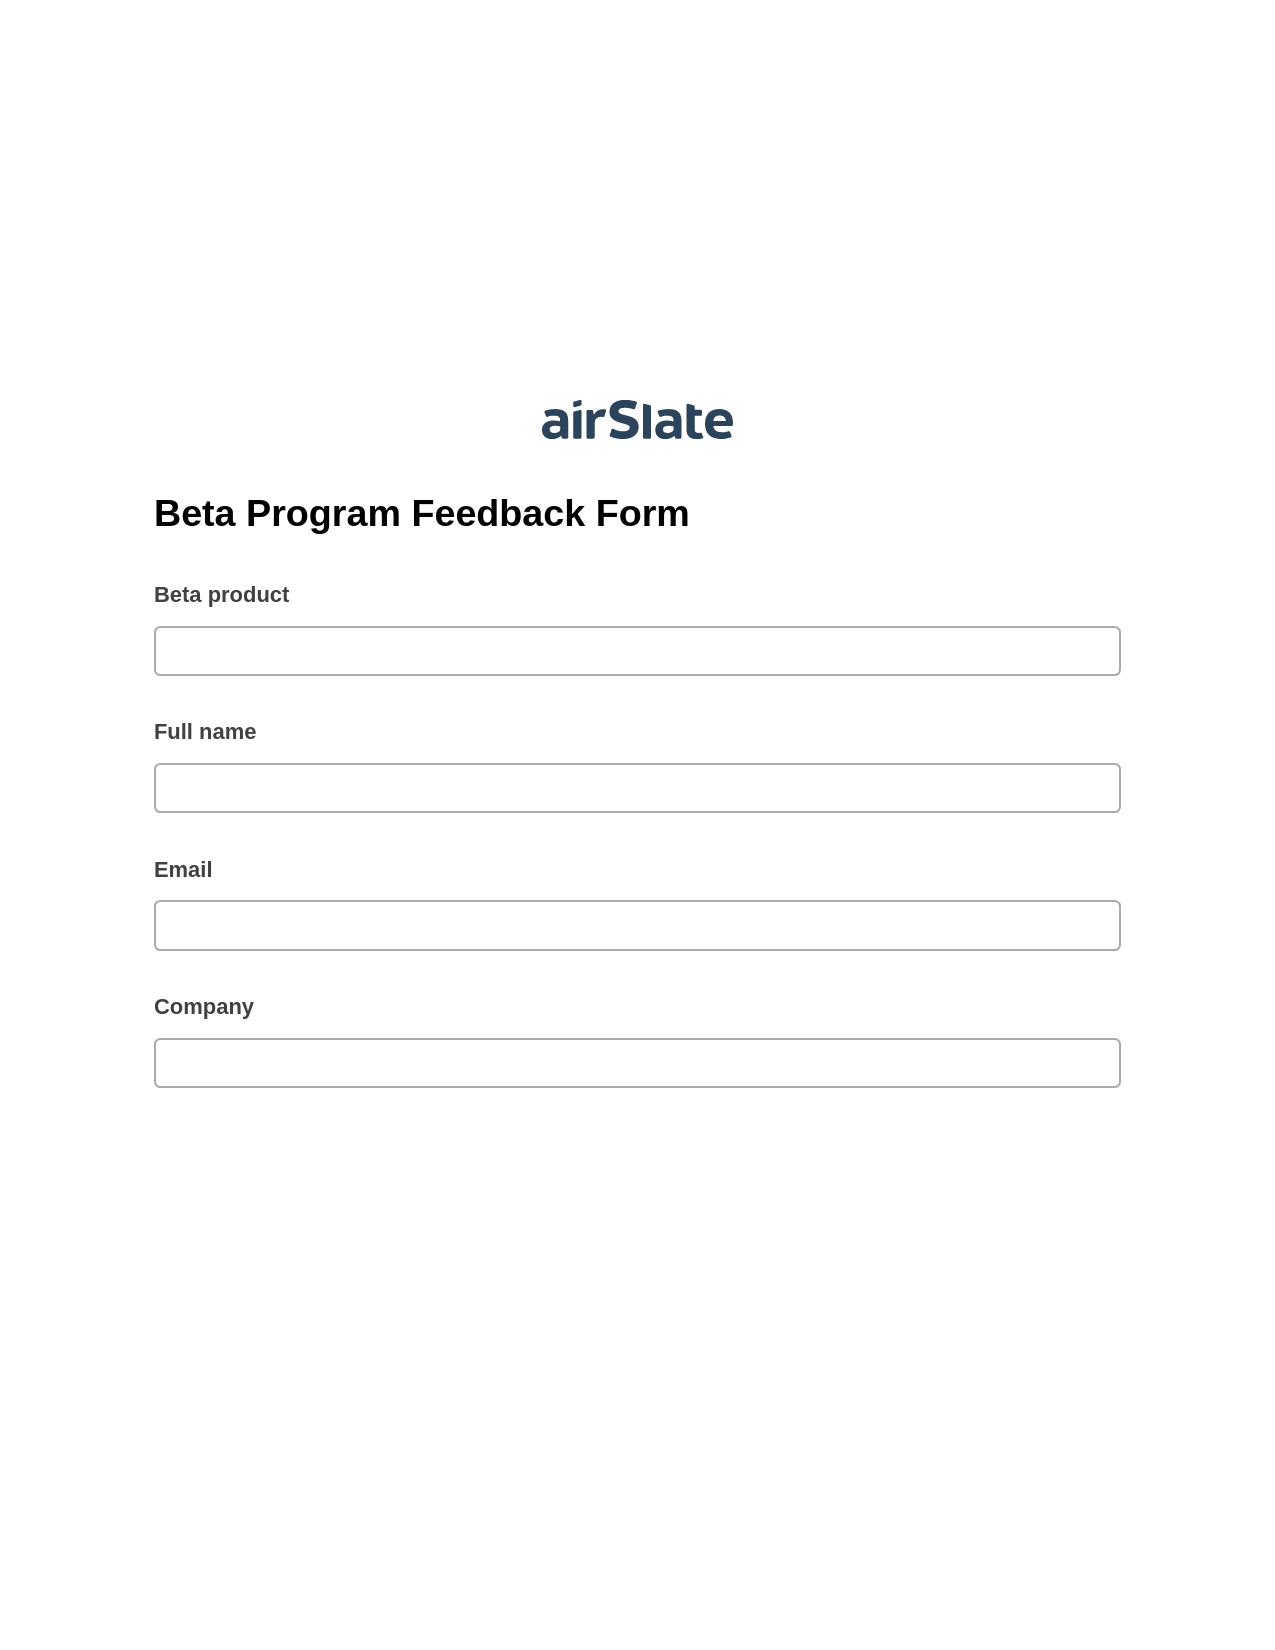 Multirole Beta Program Feedback Form Pre-fill from NetSuite Records Bot, Pre-fill with Custom Data Bot, Export to Formstack Documents Bot